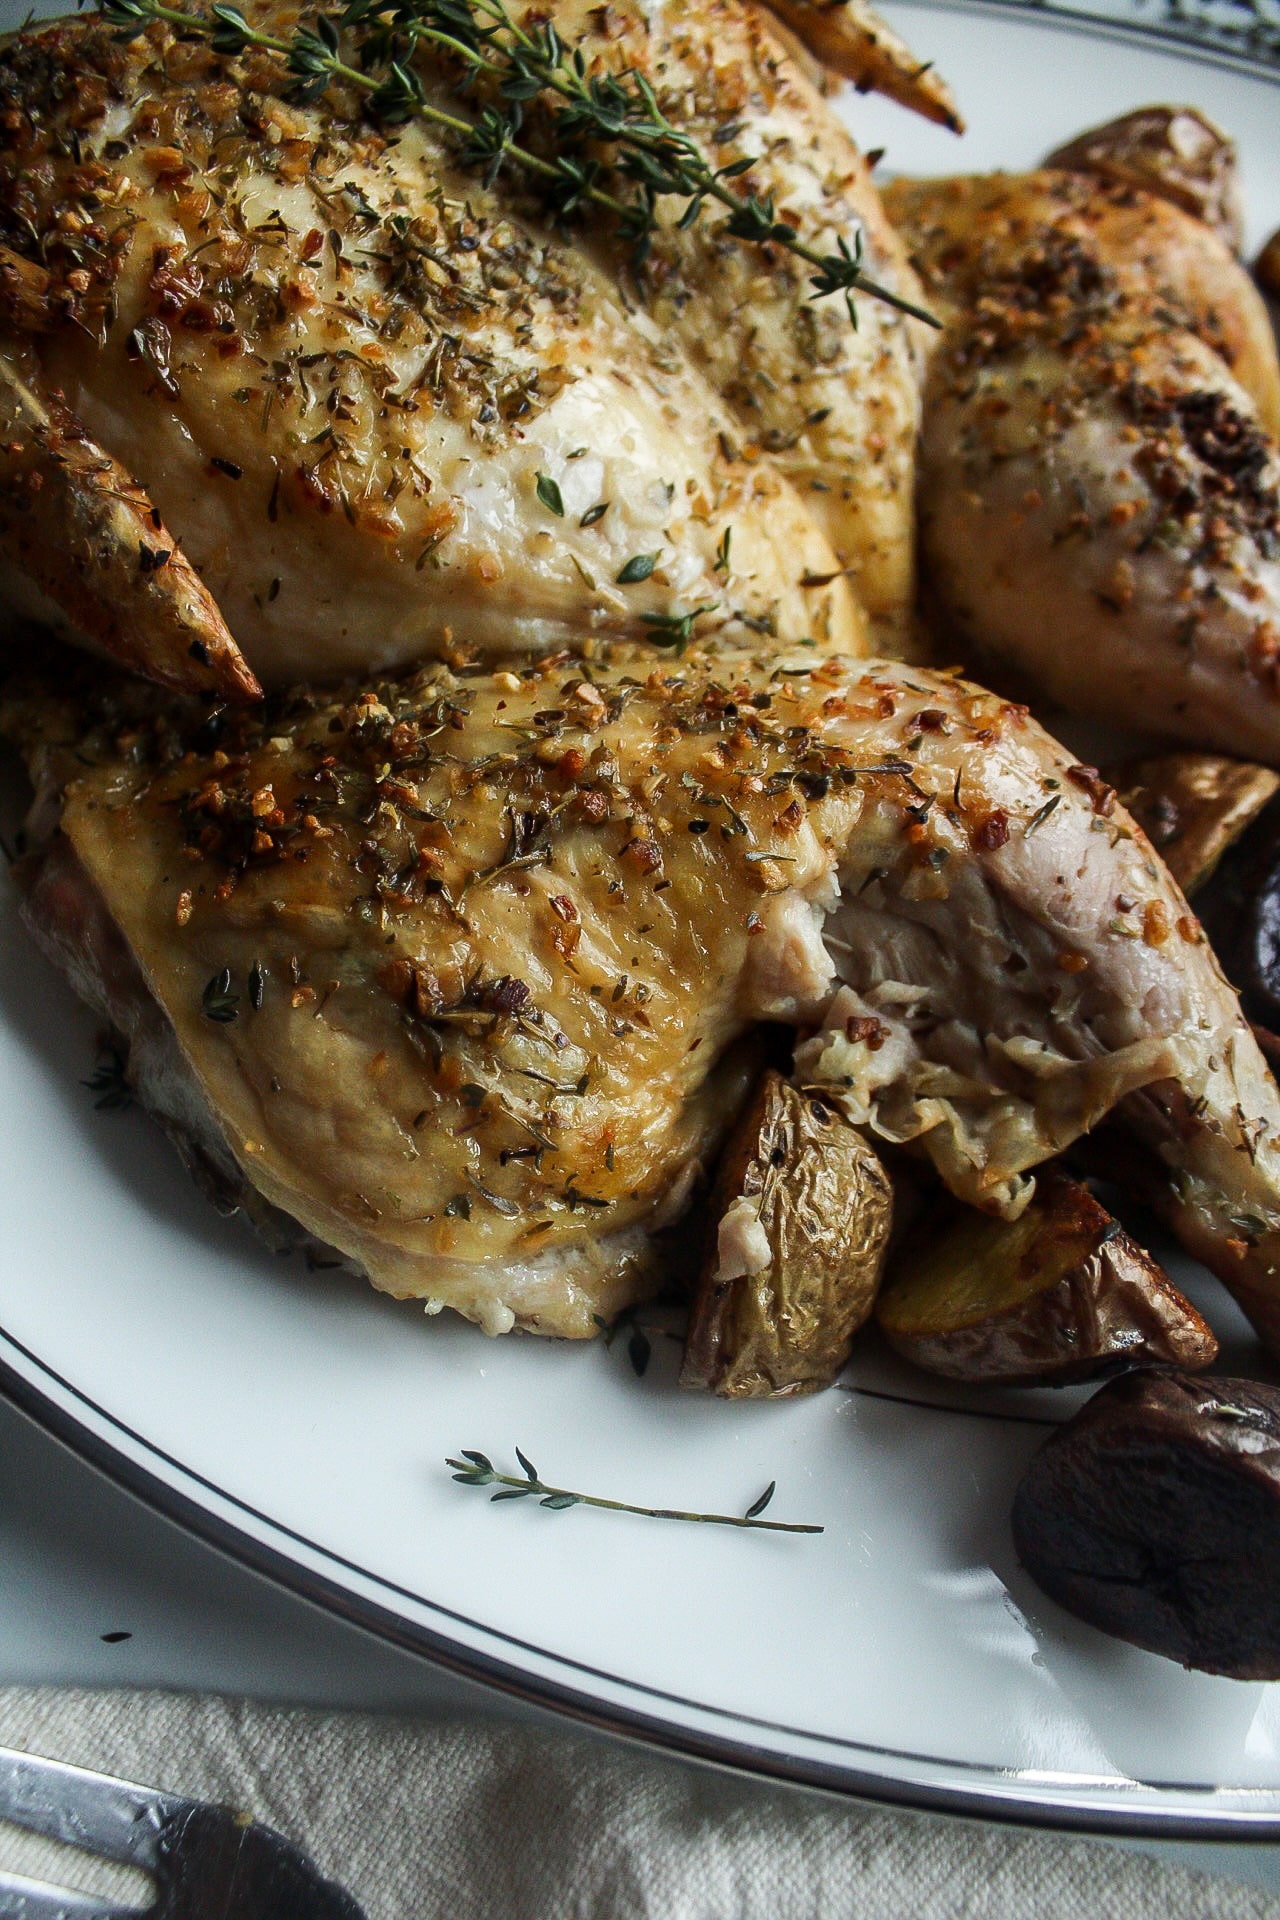 roasted leg of a whole roasted chicken on a patter with potatoes and herbs